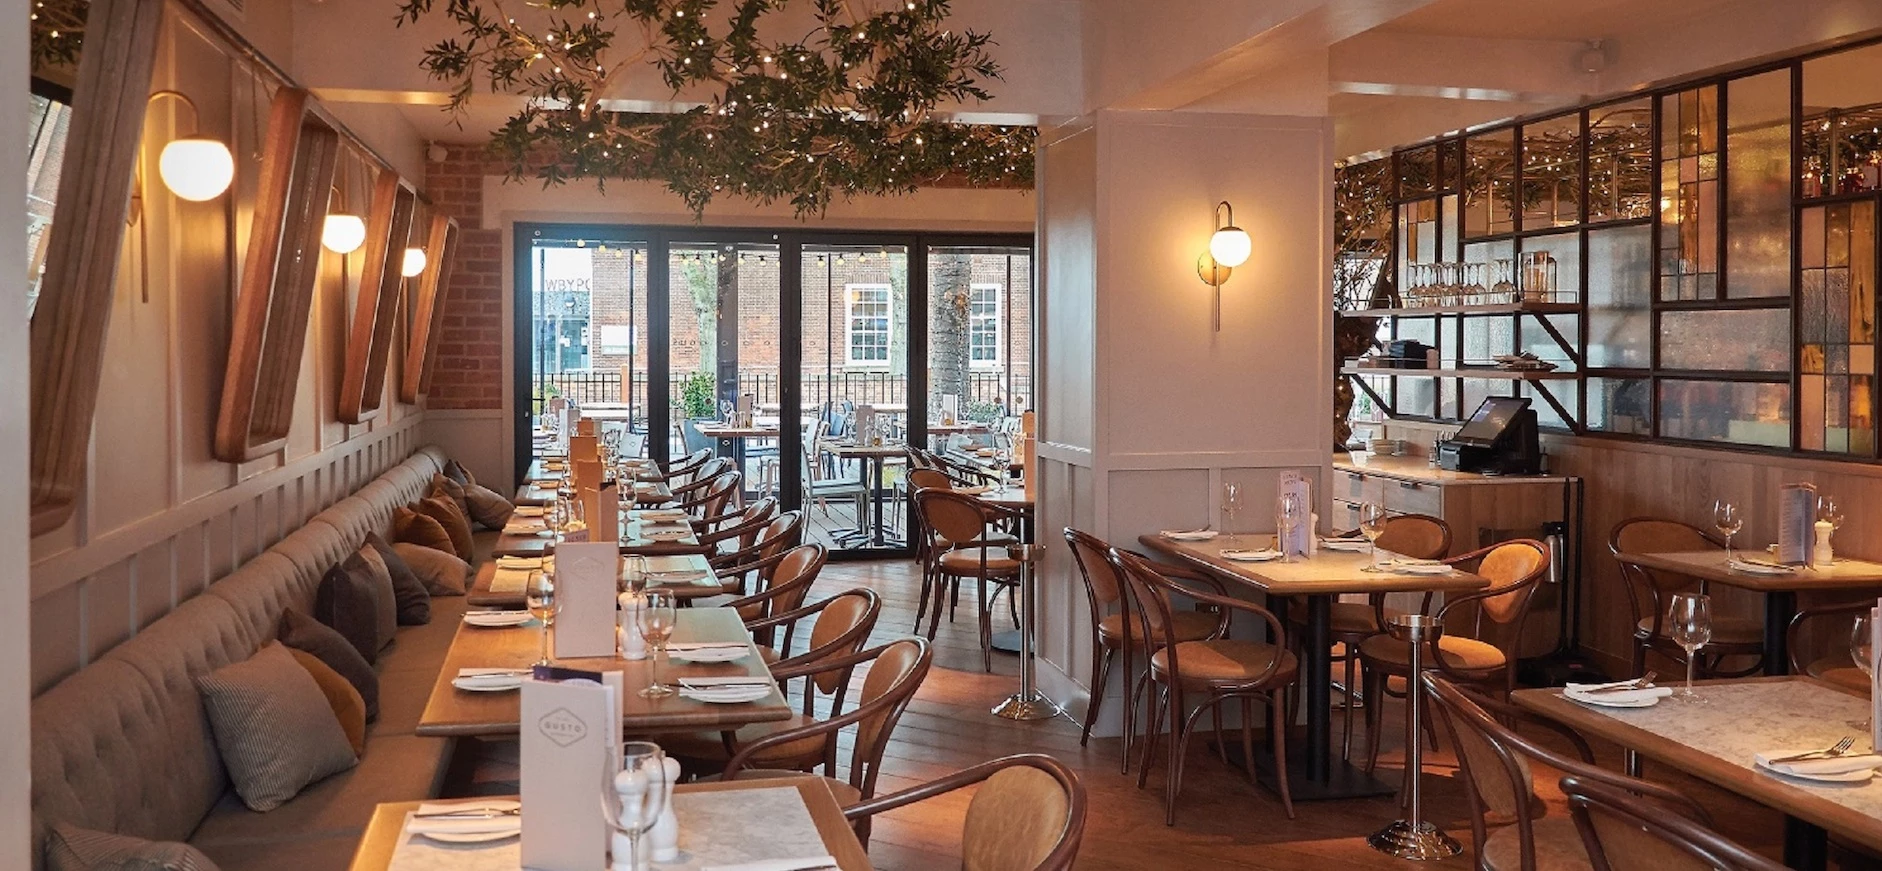  Gusto is the latest venue to hit York’s restaurant and bar scene.